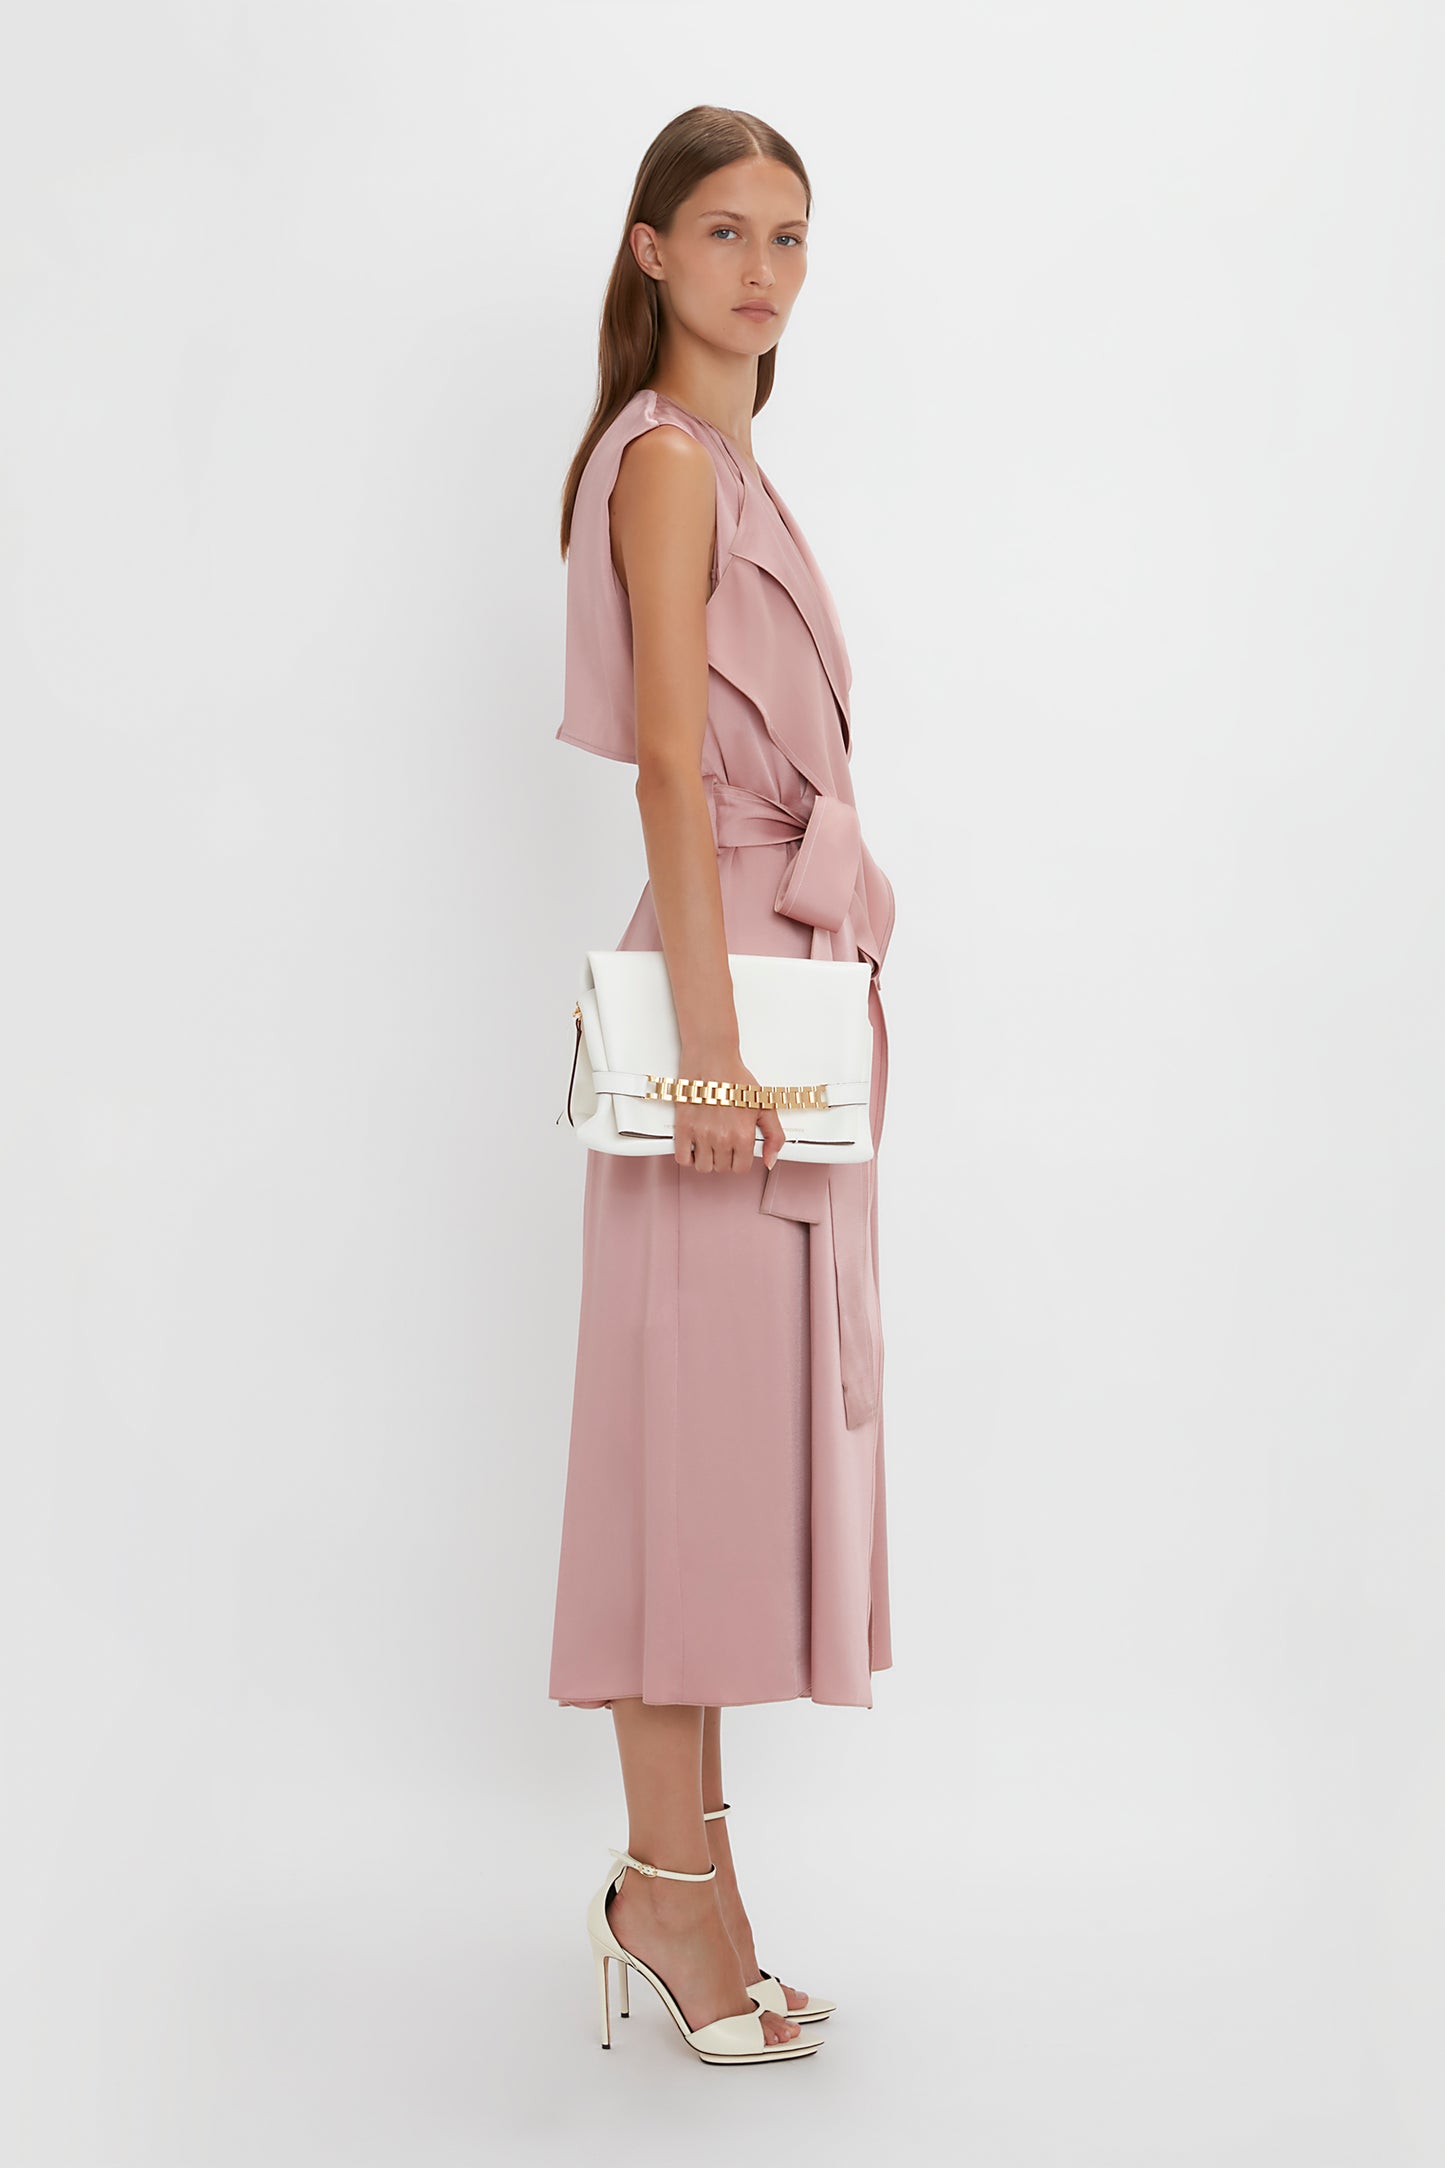 Woman in a pink sleeveless dress with a white Victoria Beckham Nappa leather Chain Pouch with Strap, standing against a plain white background.